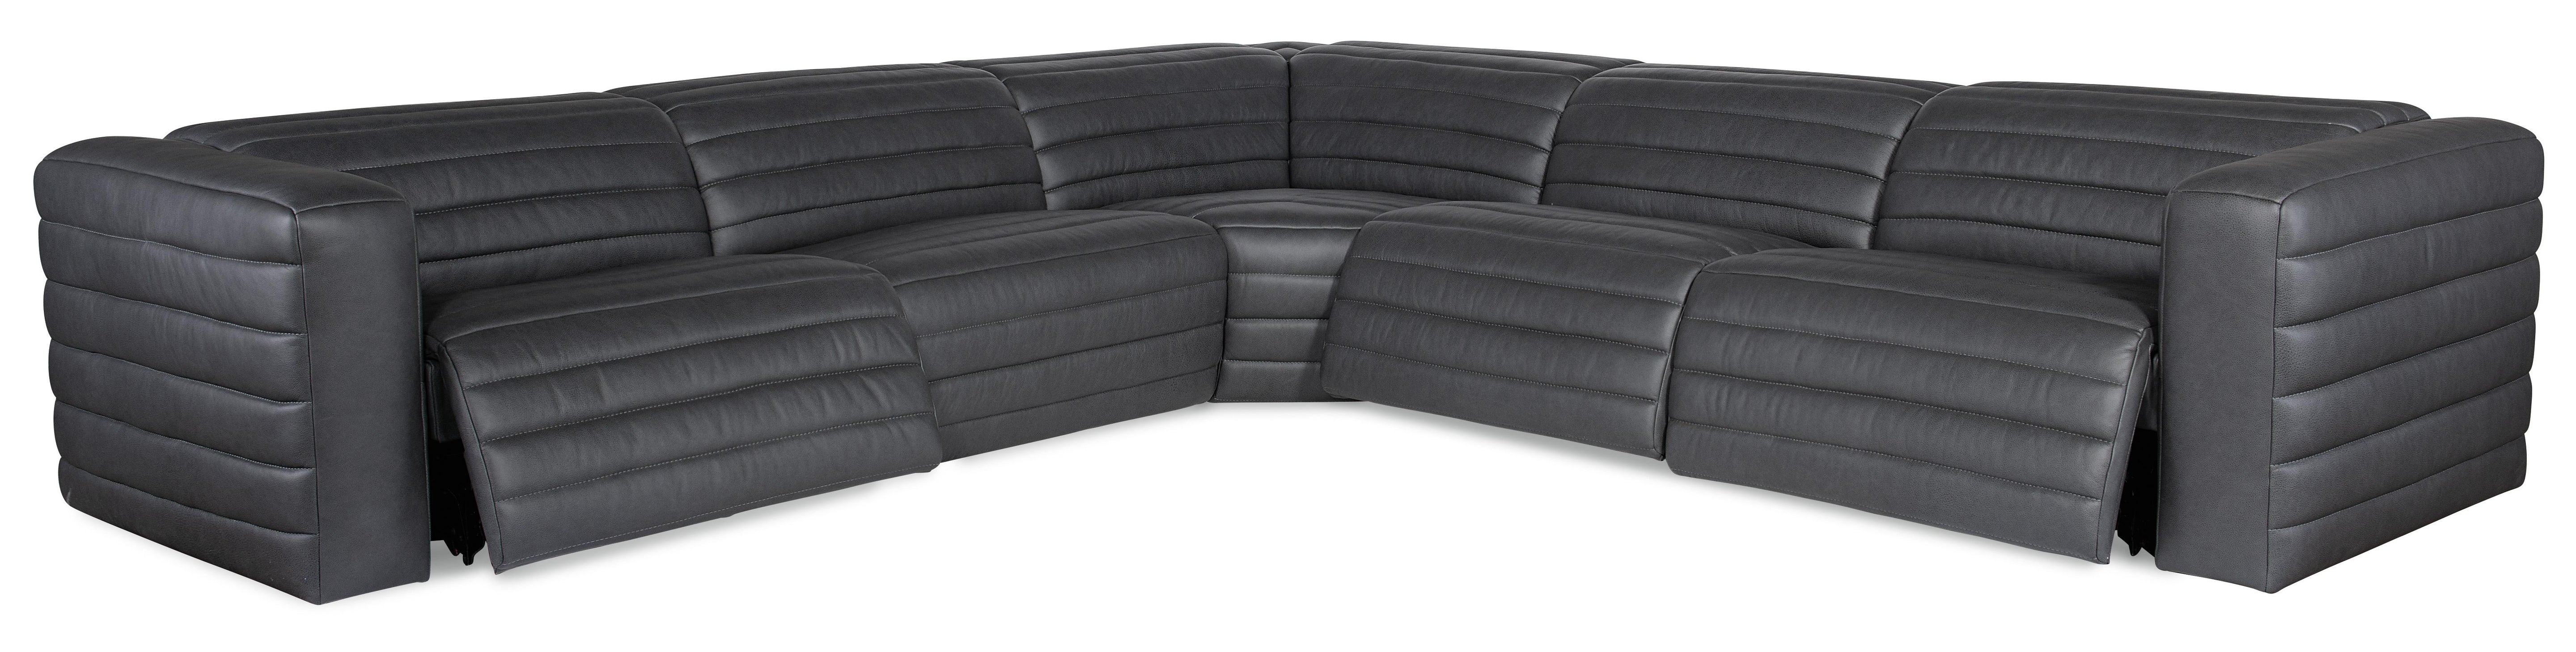 Chatelain 5-Piece Power Headrest Sectional with 2 Power Recliners - SS454-G5PS-097